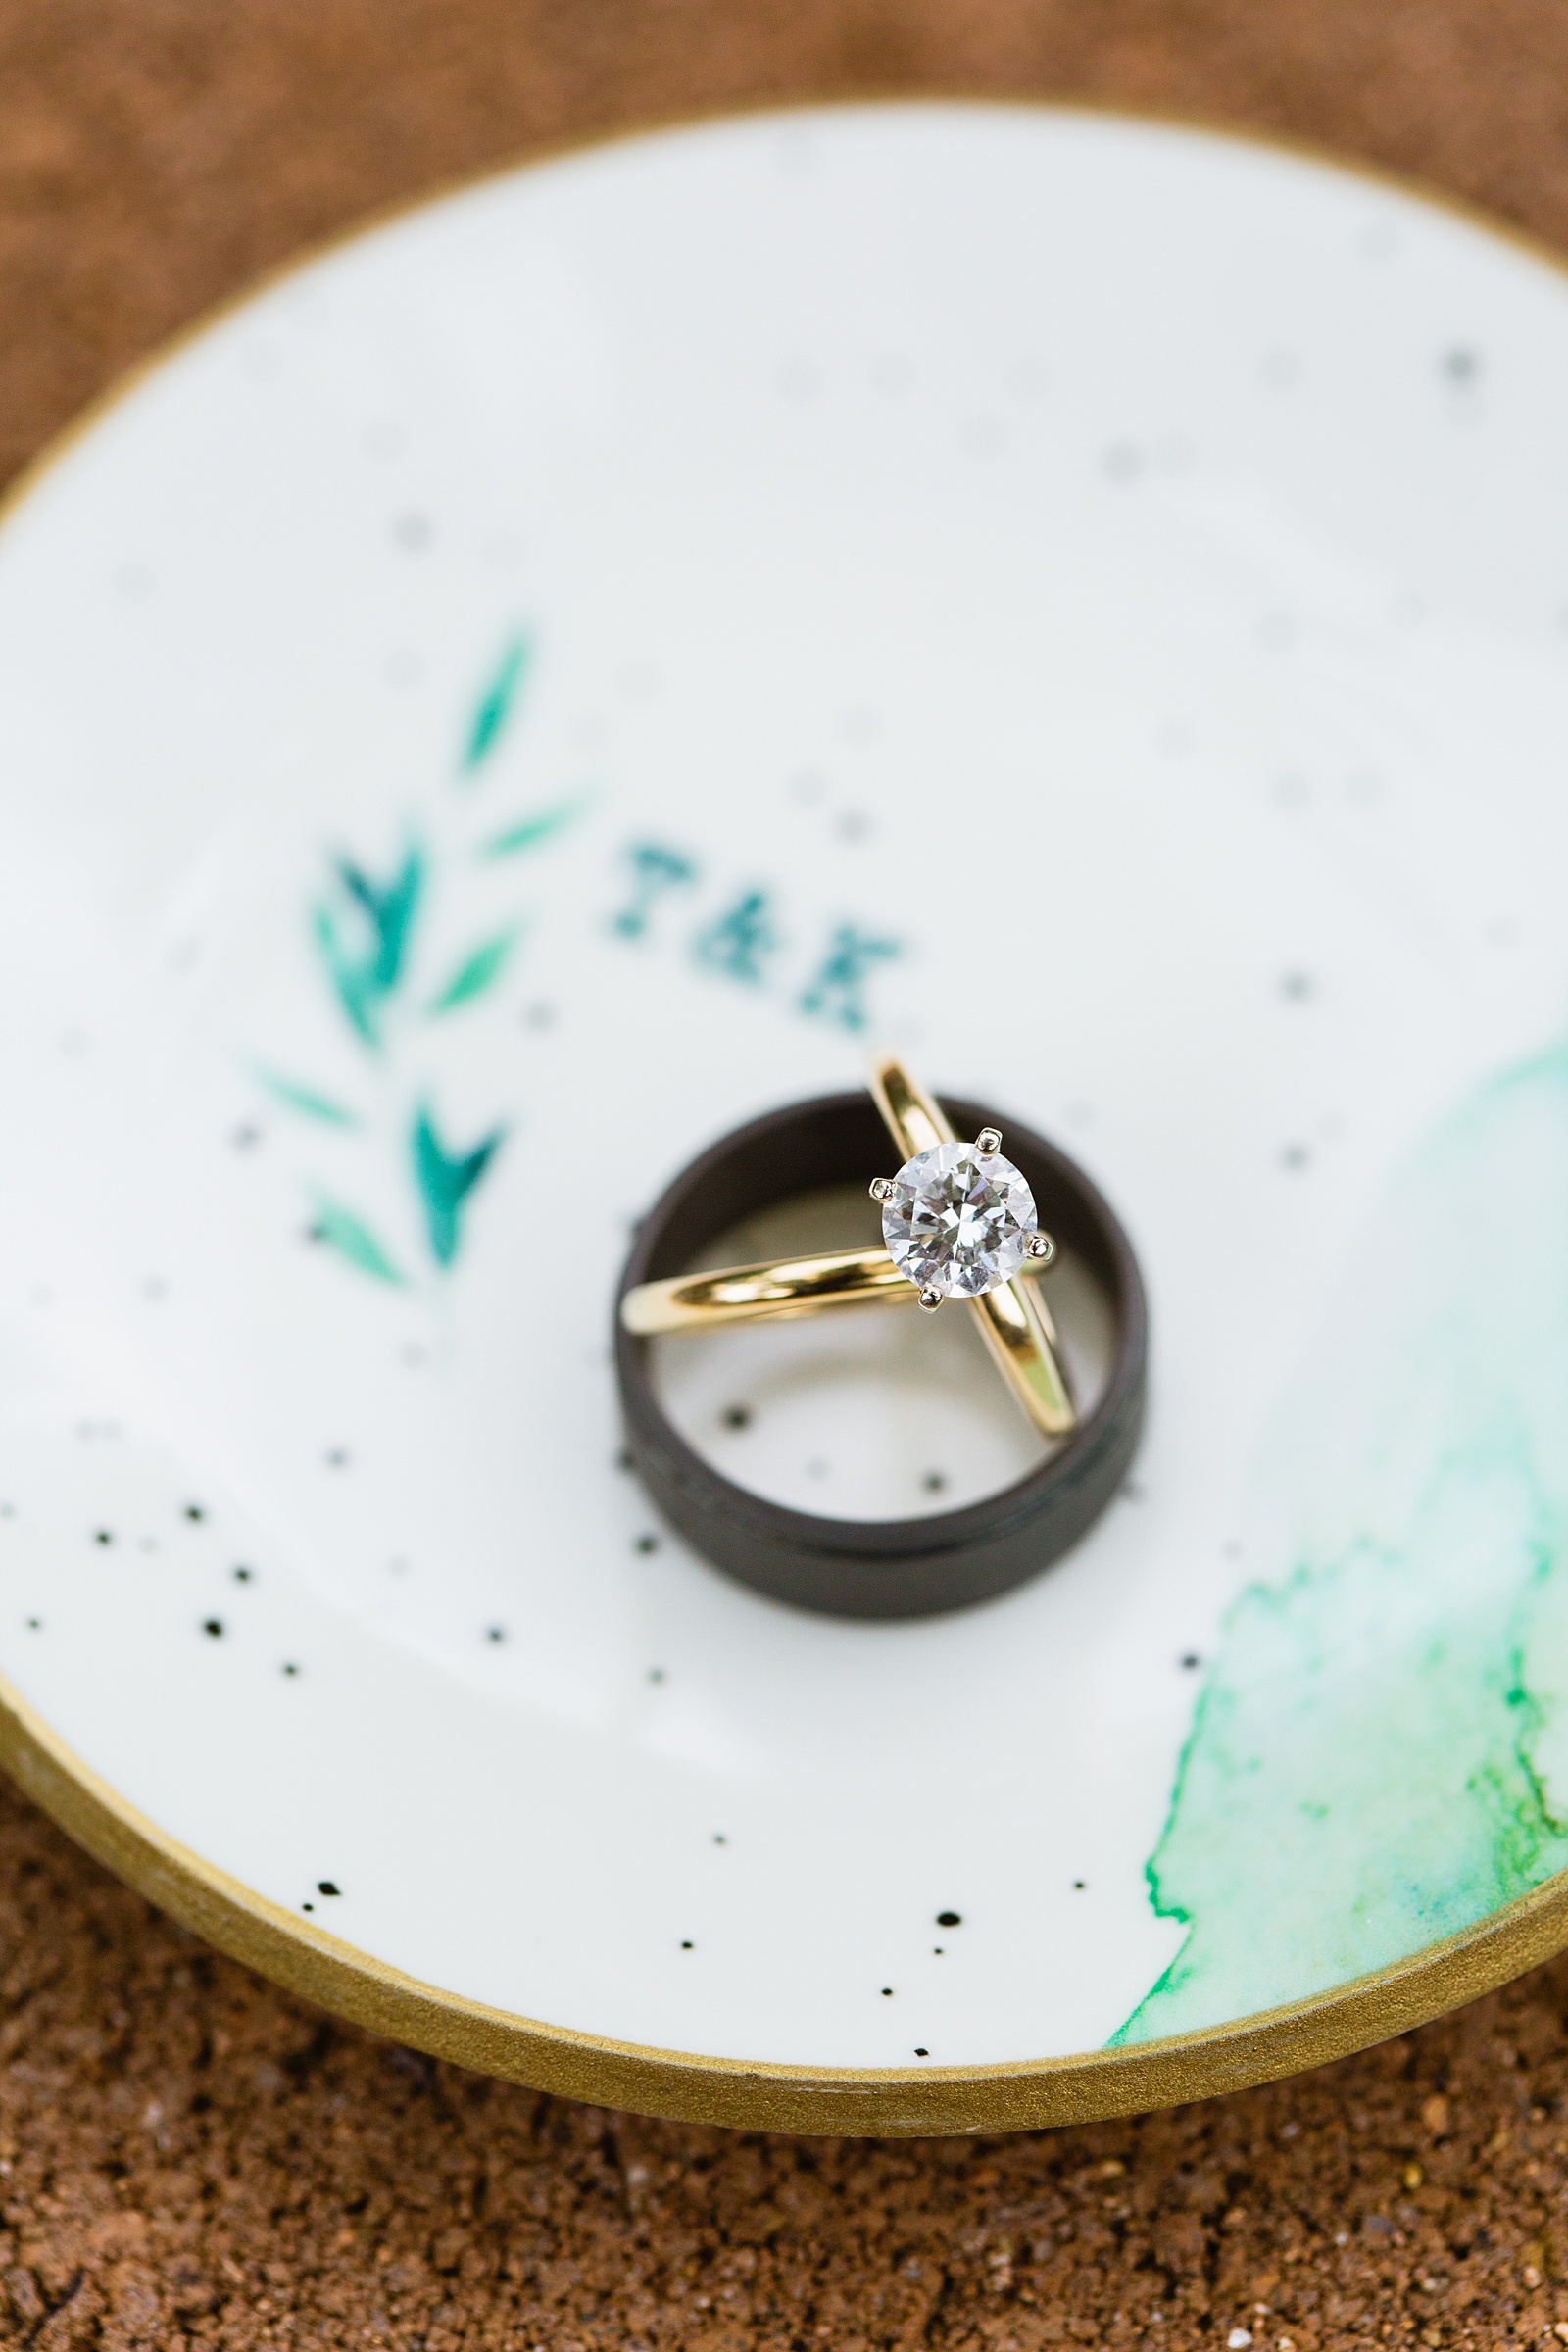 Bride's wedding day details of wedding bands by PMA Photography.